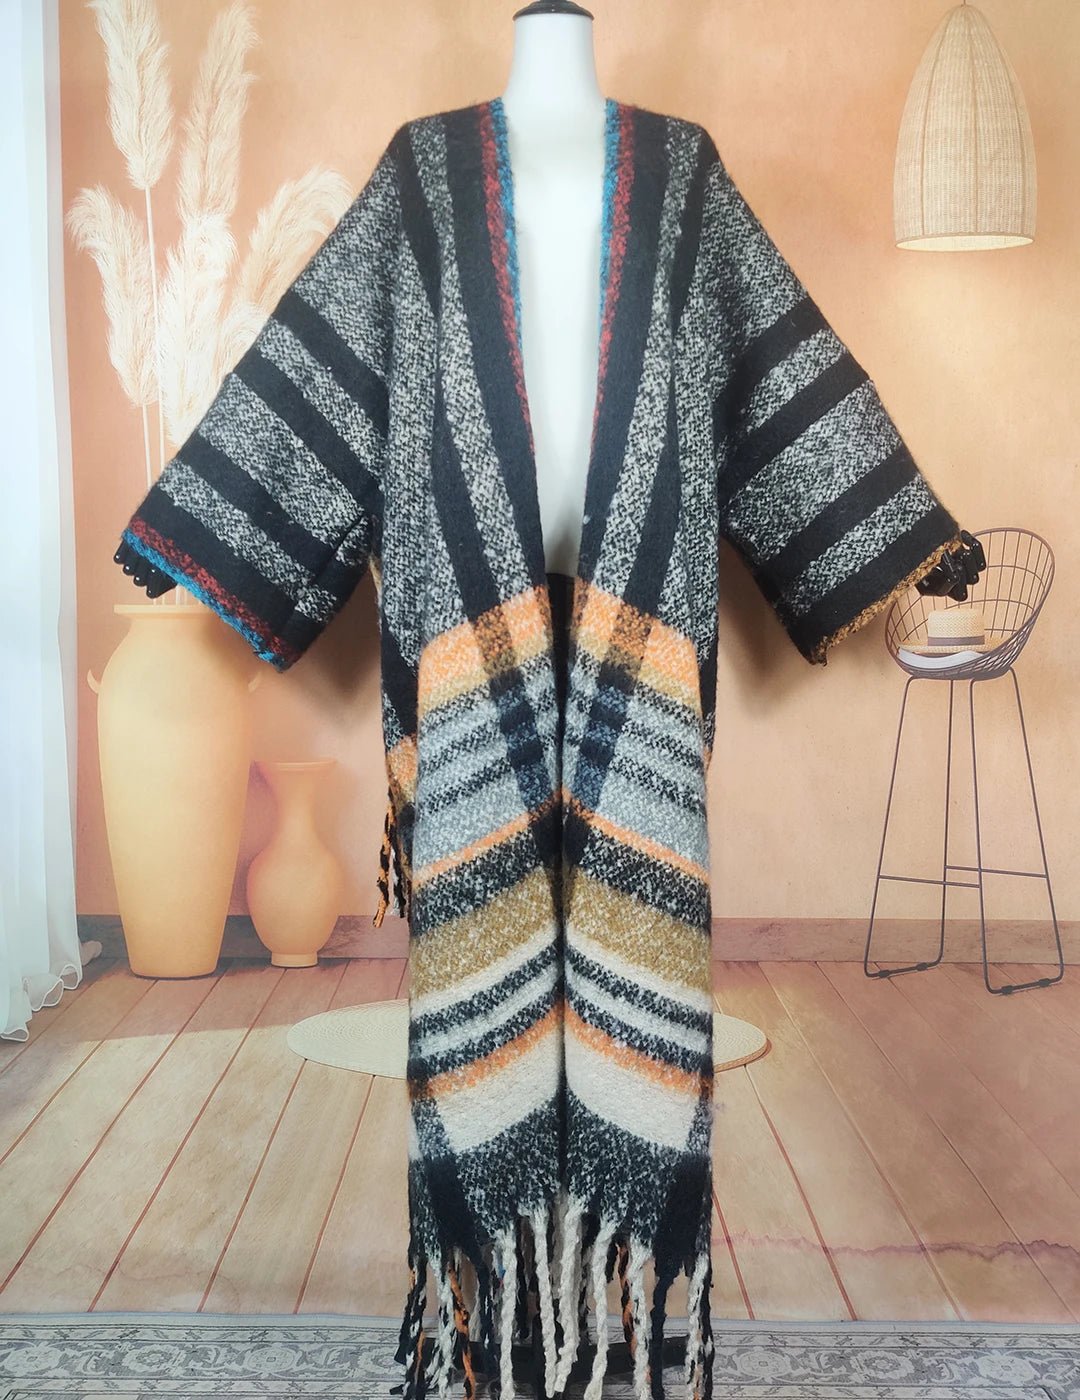 Chic Winter Wear: Cozy African Women's Long Duster Coat in Plus Size - Flexi Africa - Flexi Africa offers Free Delivery Worldwide - Vibrant African traditional clothing showcasing bold prints and intricate designs